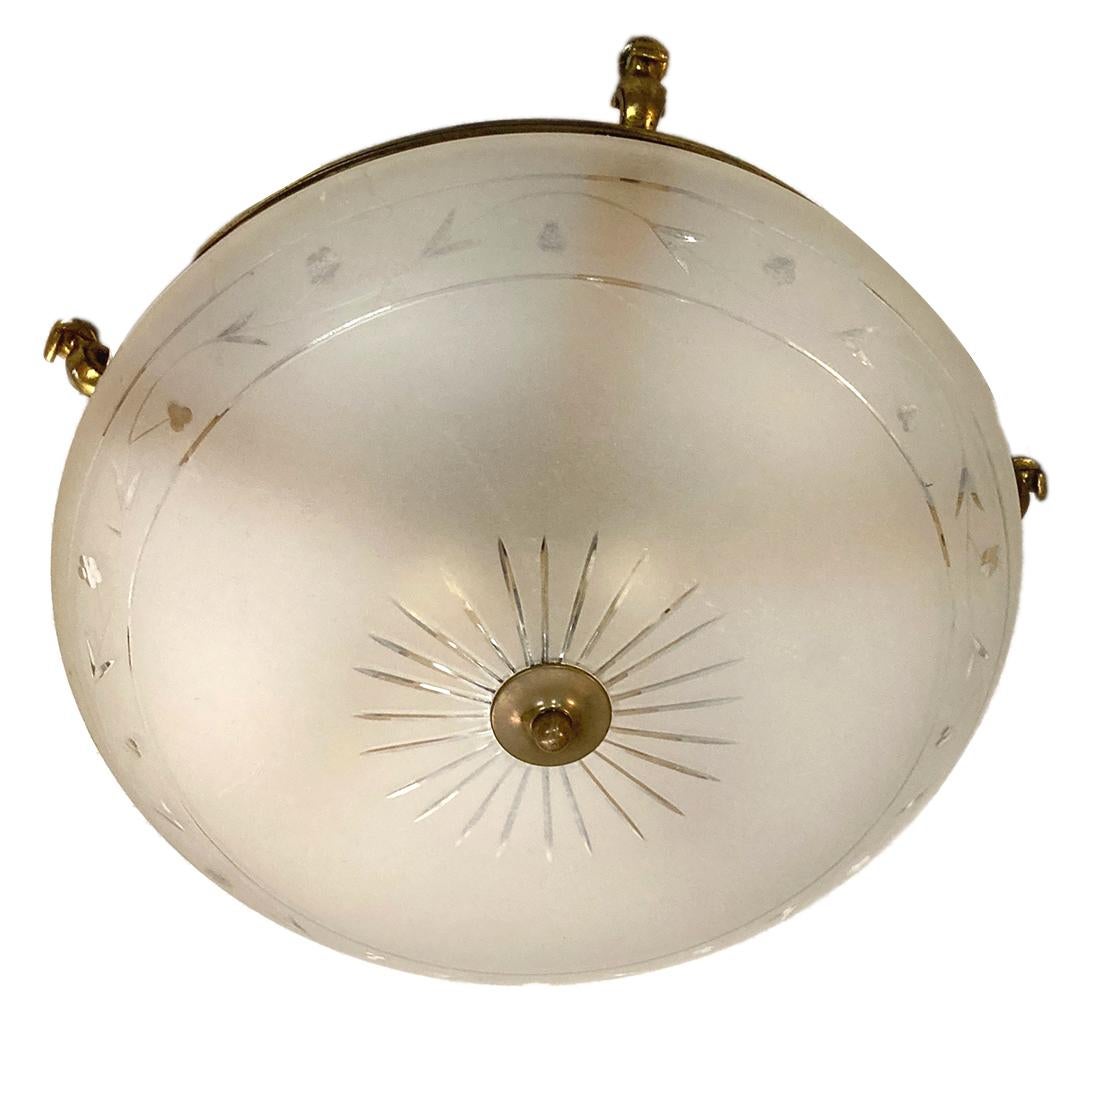 A circa 1920's French etched frosted glass flush mounted light fixture.

Measurements:
Diameter: 17